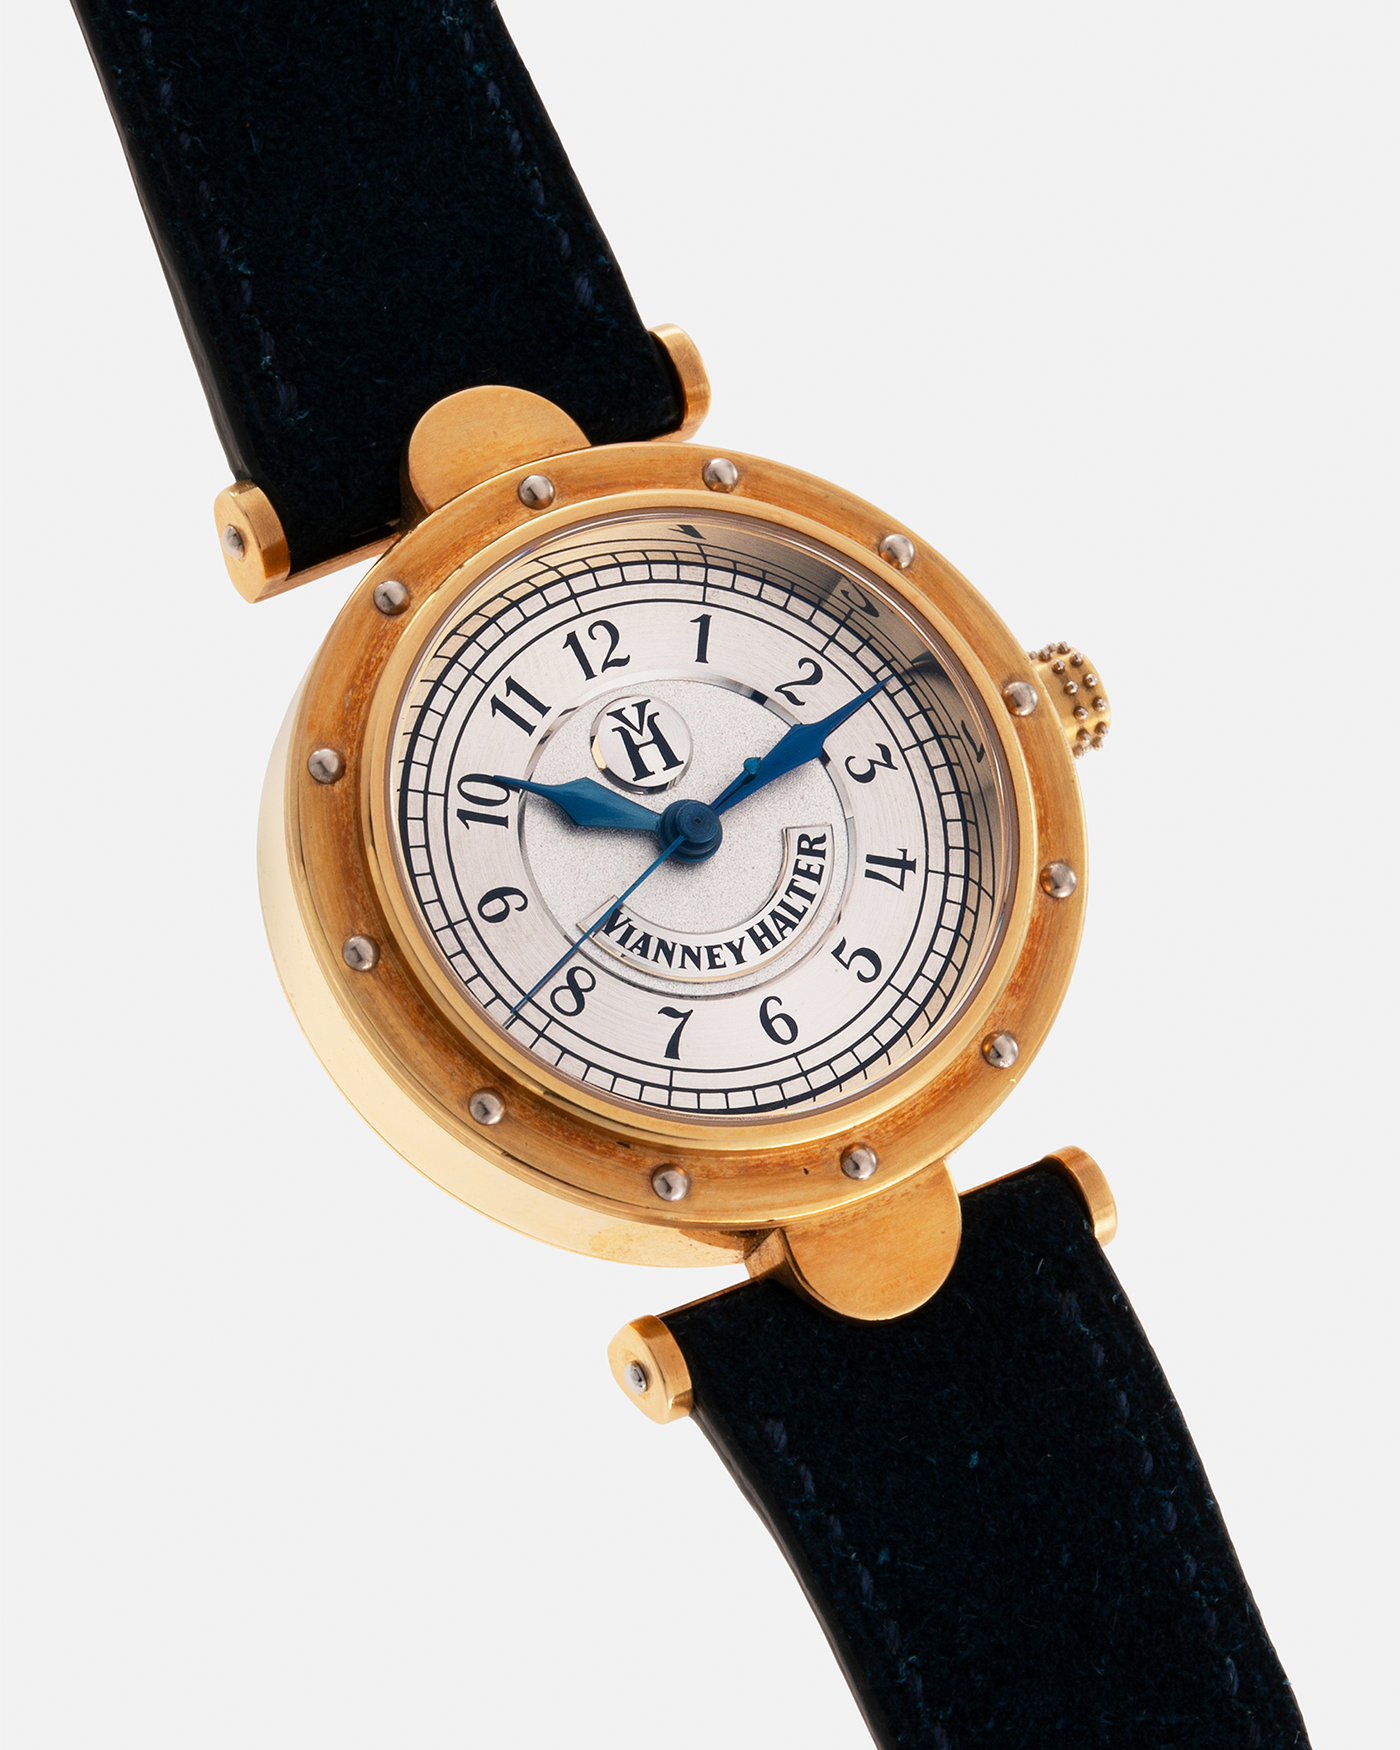 Brand: Vianney Halter Year: 2000’s Model: Classic Material: 18k Yellow Gold Movement: Modified Lemania 8810 with mystery motor Case Diameter: 36mm Bracelet/Strap: Blue Suede strap with Yellow Gold Tang Buckle